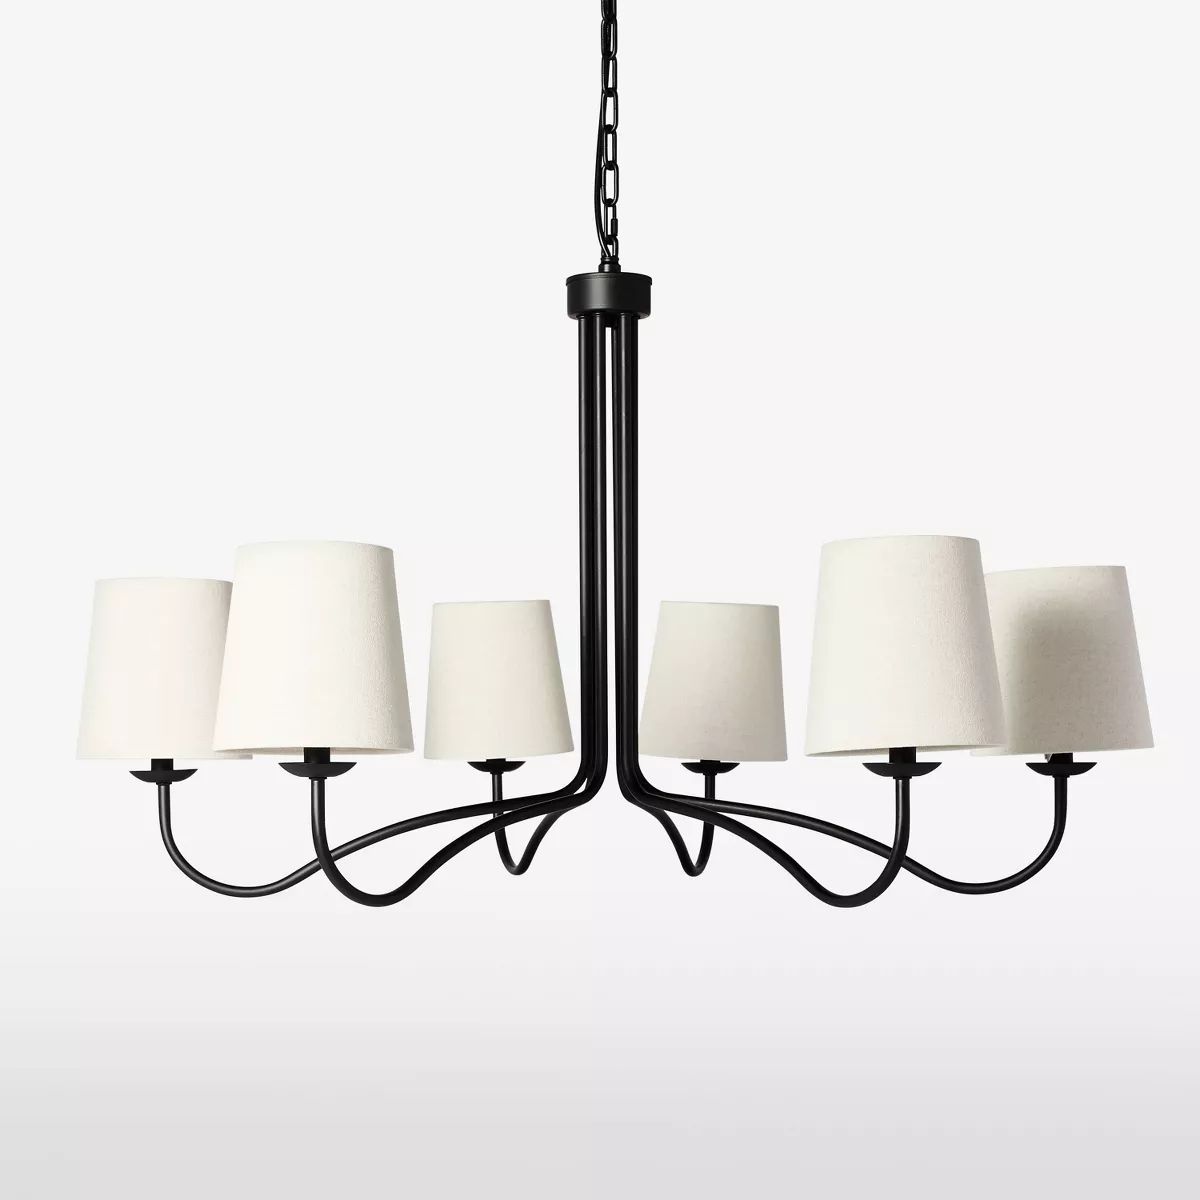 6-Arm Candelabra Chandelier Ceiling Light Black Finish - Hearth & Hand™ with Magnolia | Target